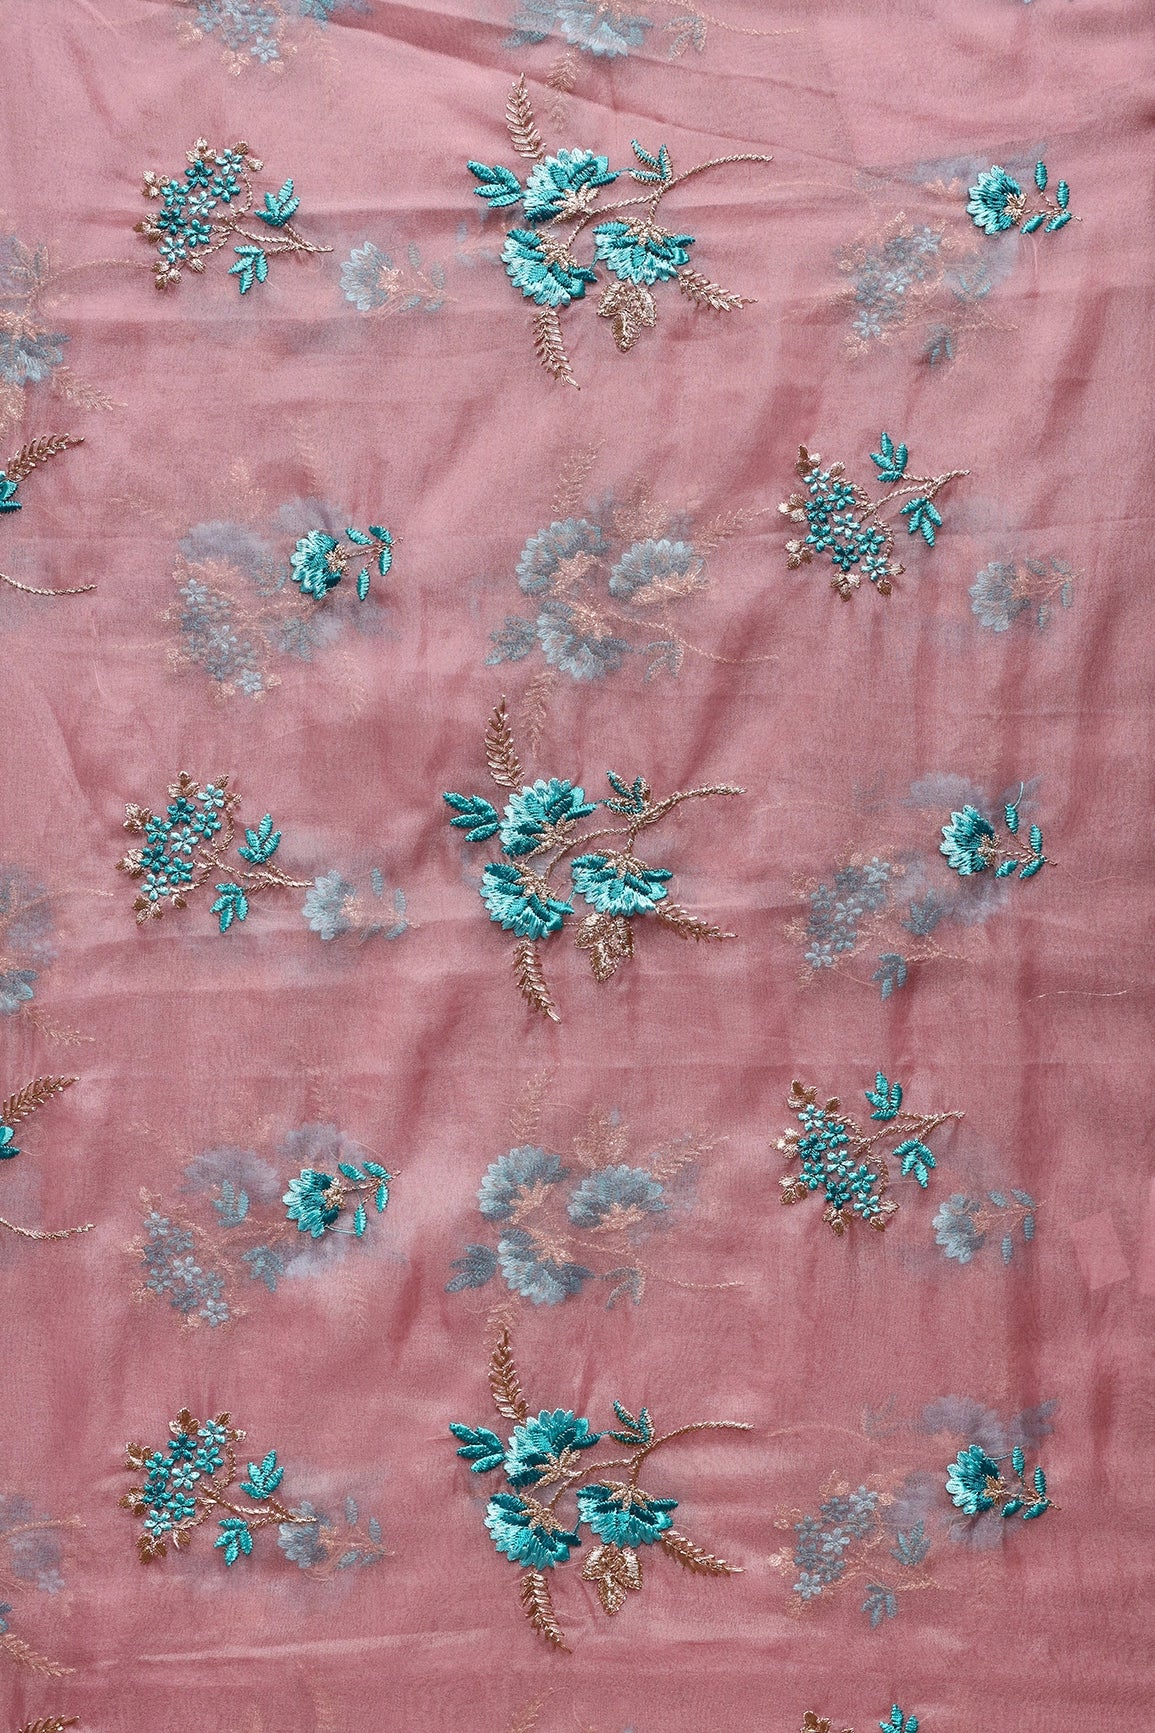 2 Meter Cut Piece Of Teal Thread With Gold Zari Floral Embroidery On Pink Organza Fabric